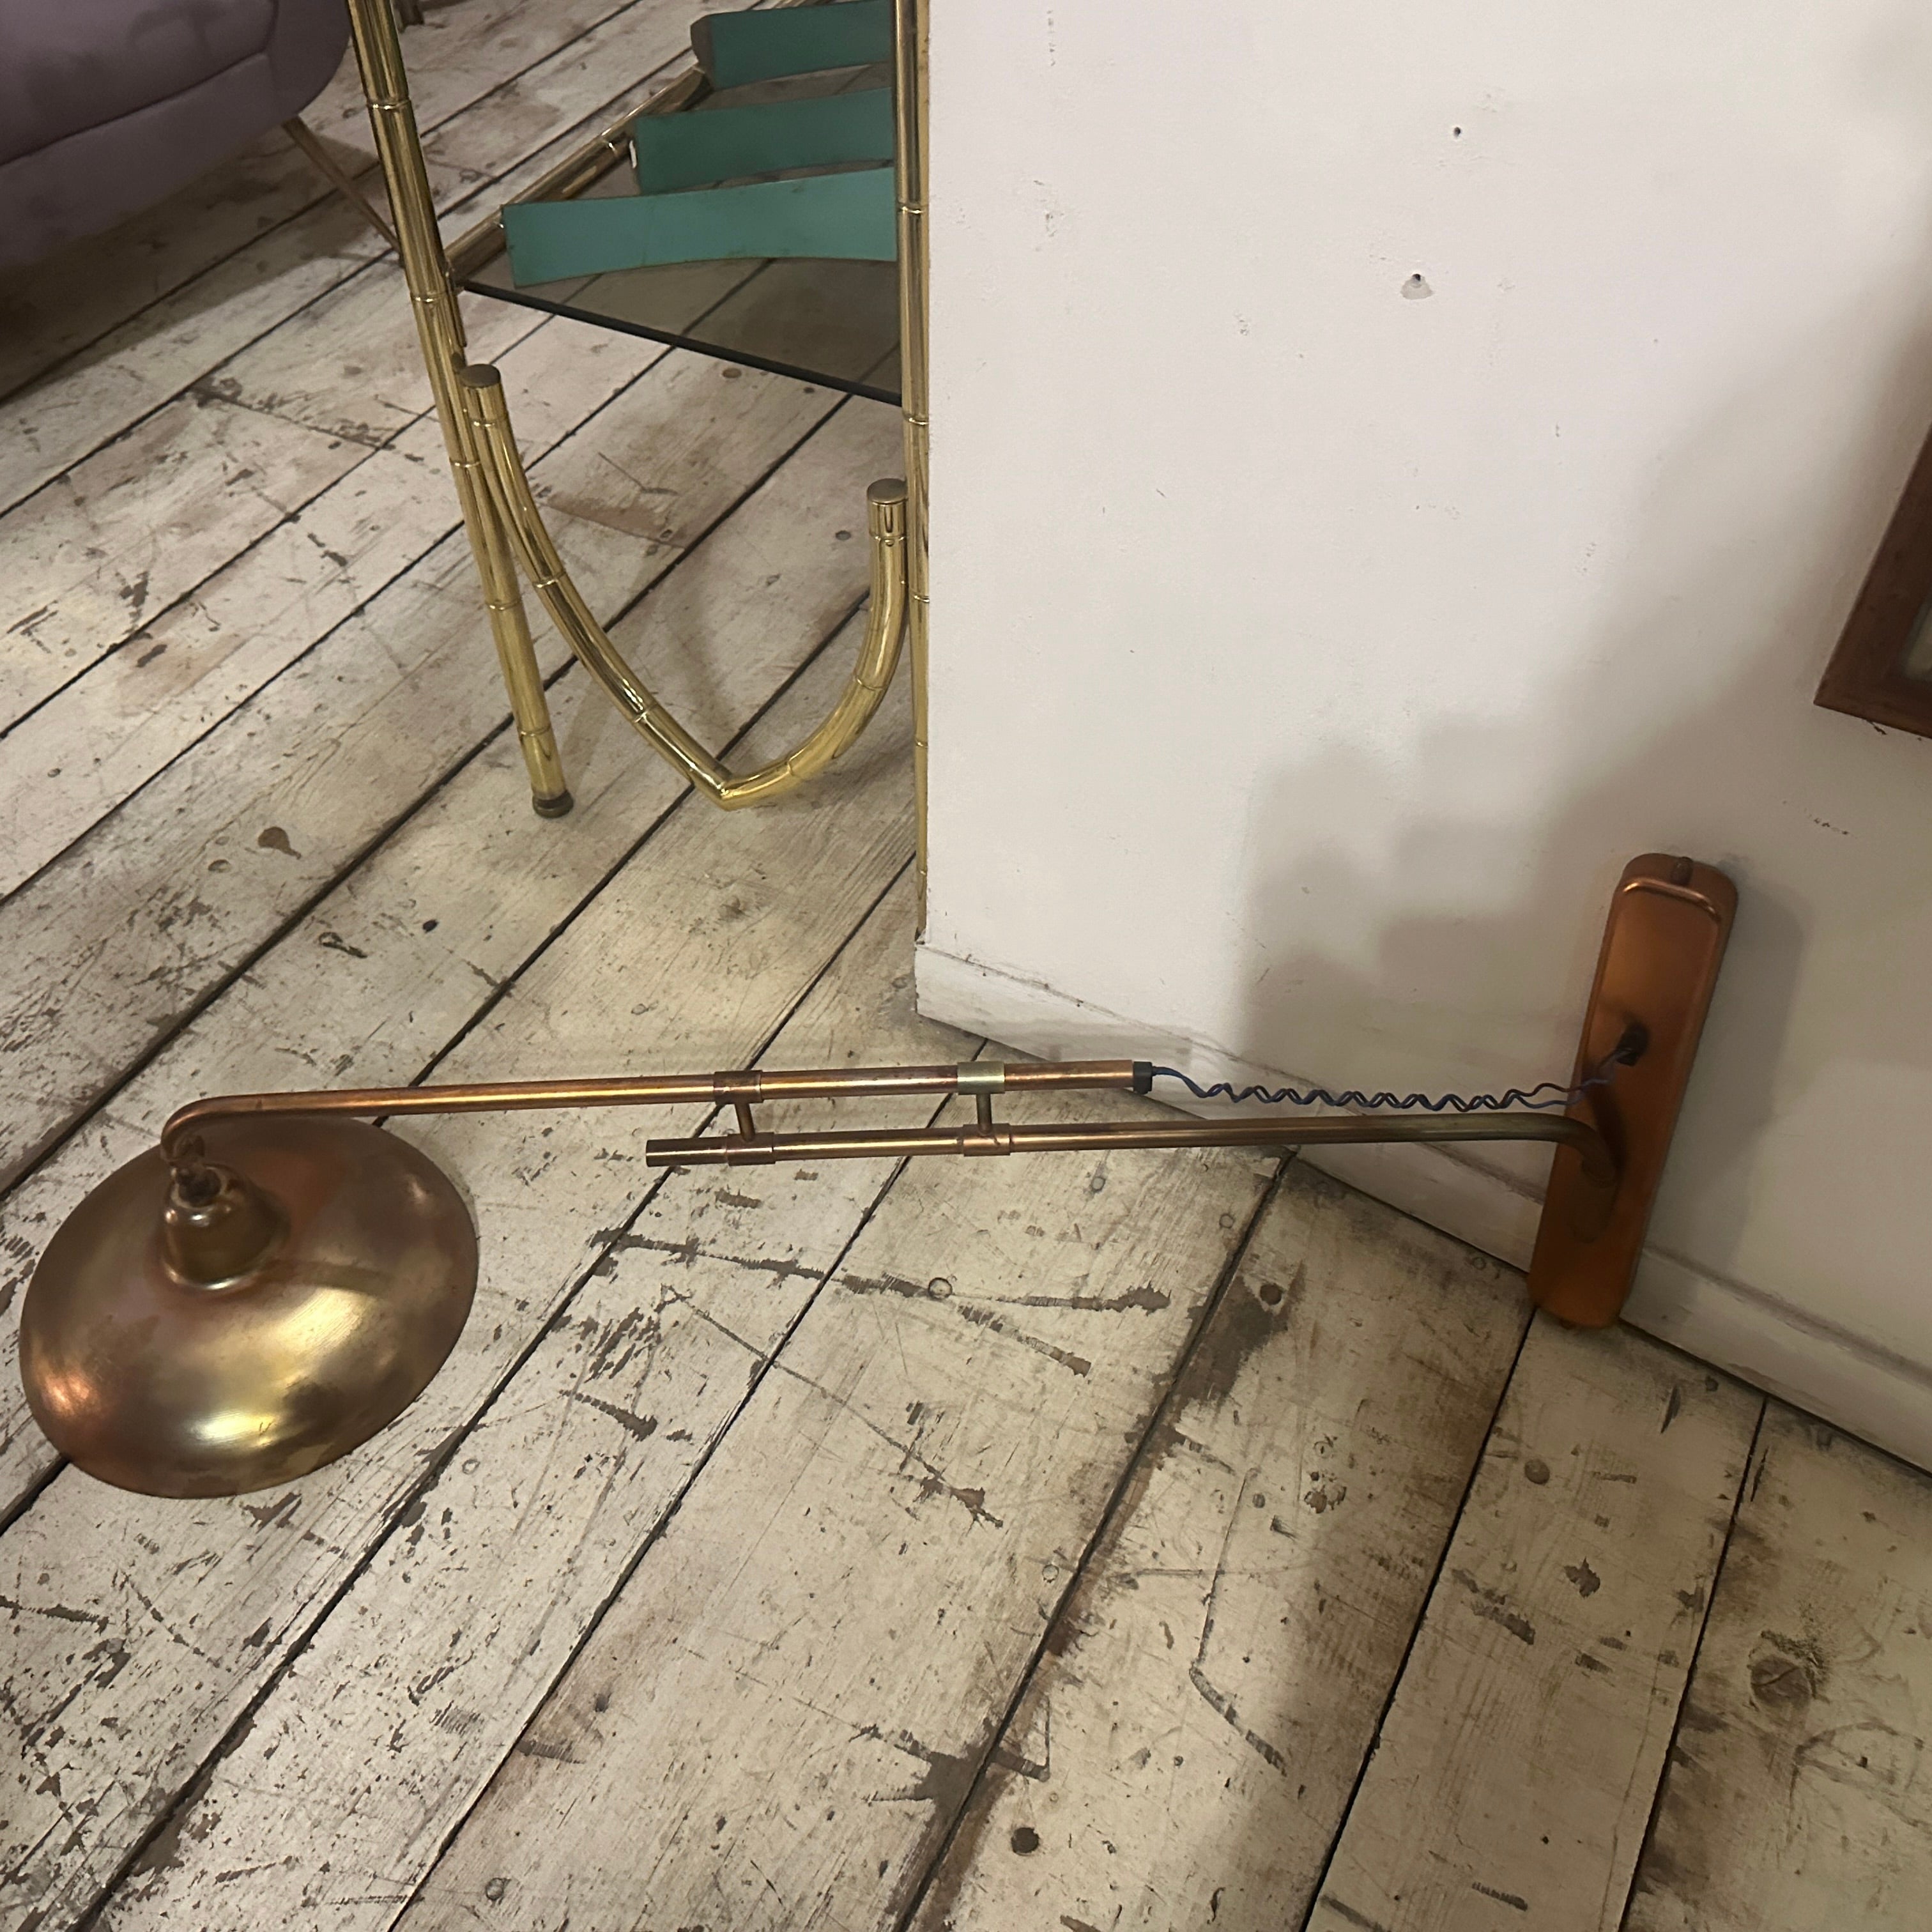 An extendable table lamp designed and manufactured in Italy in the Fifties, copper finished iron has signs of use and age, it's in working order. It's a vintage lighting fixture that reflects the design trends of that era with typical